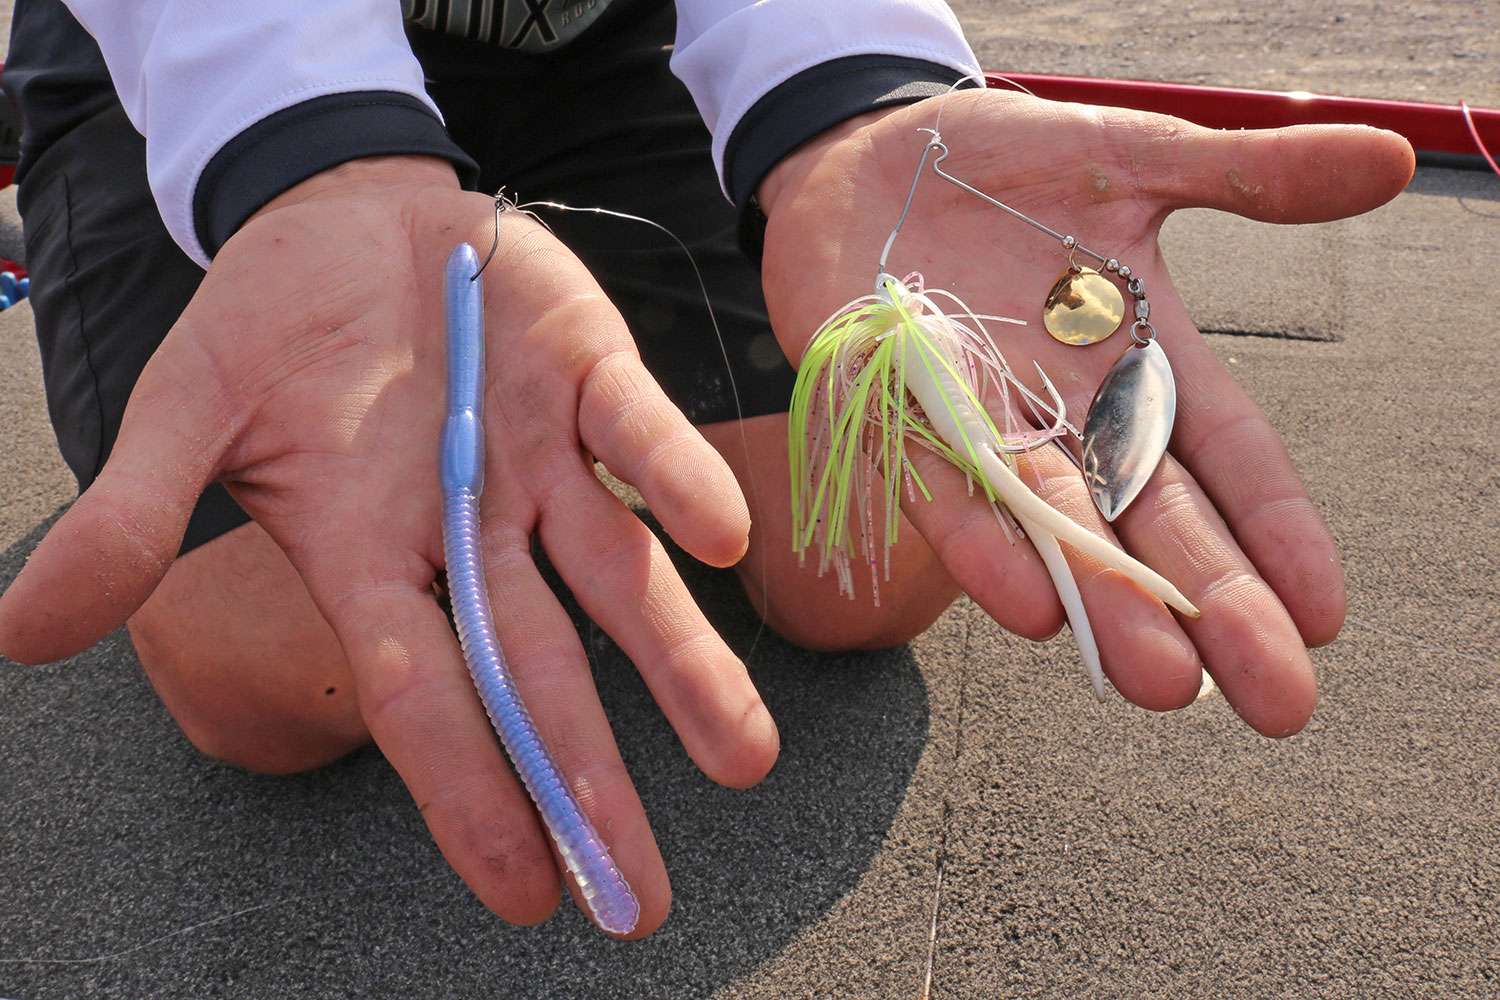 Davis made the drop shot with a No. 1 VMC hook, 1/2-ounce weight and 6-inch Davis Bait Co. Shaky Worm. He also used a 1/2-ounce Davis Spinnerbait with tandem Colorado and willowleaf blades. He added a 3.5-inch Zoom Split Tail Trailer. 